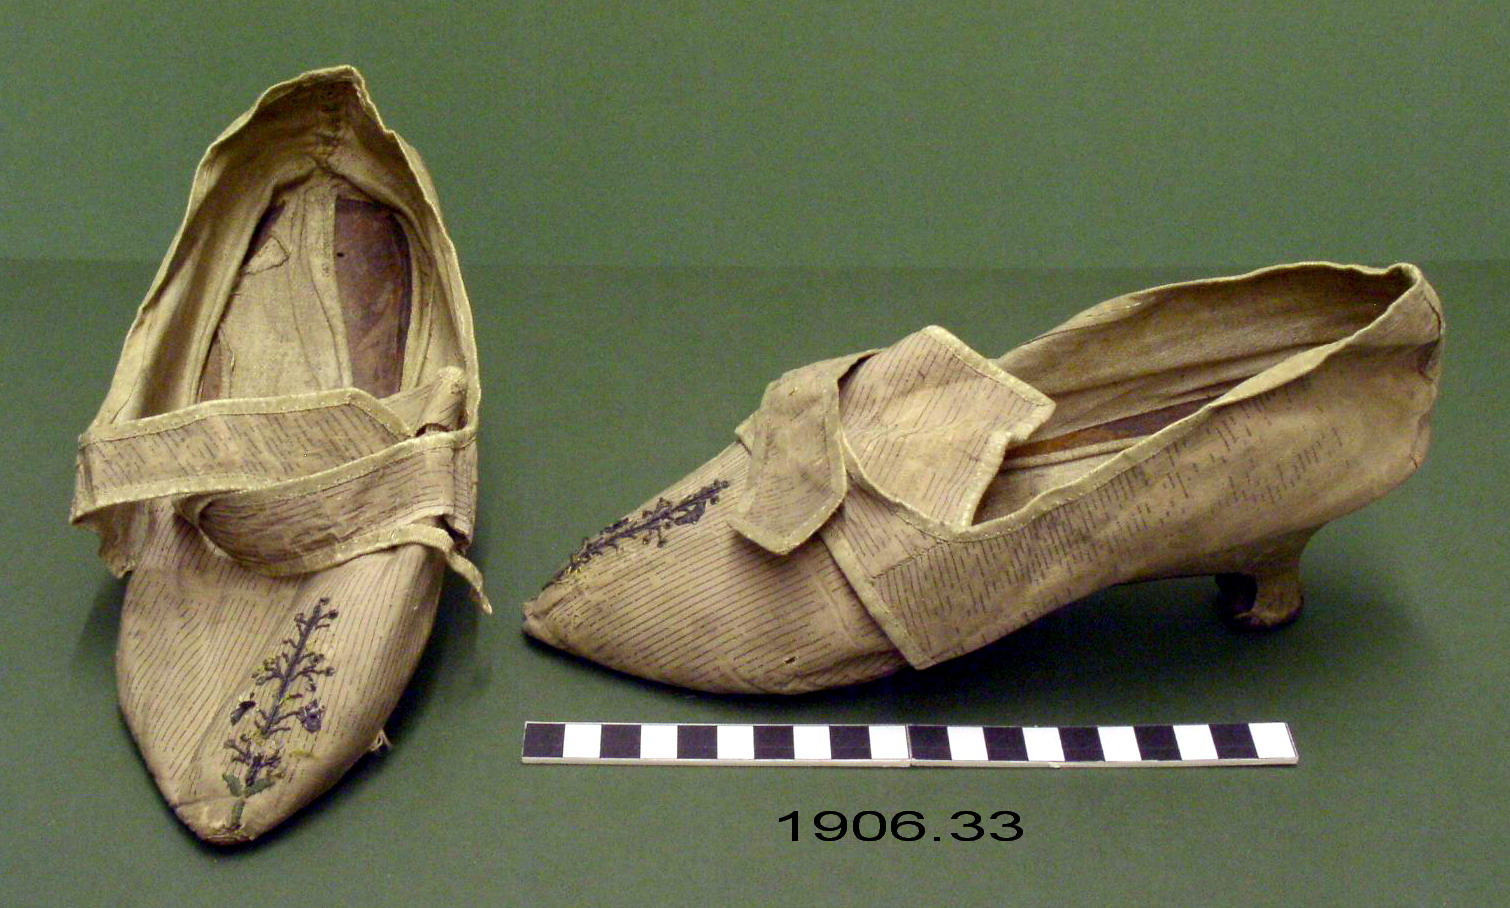 a A pair of shoes worn at a coronation ball in 1821